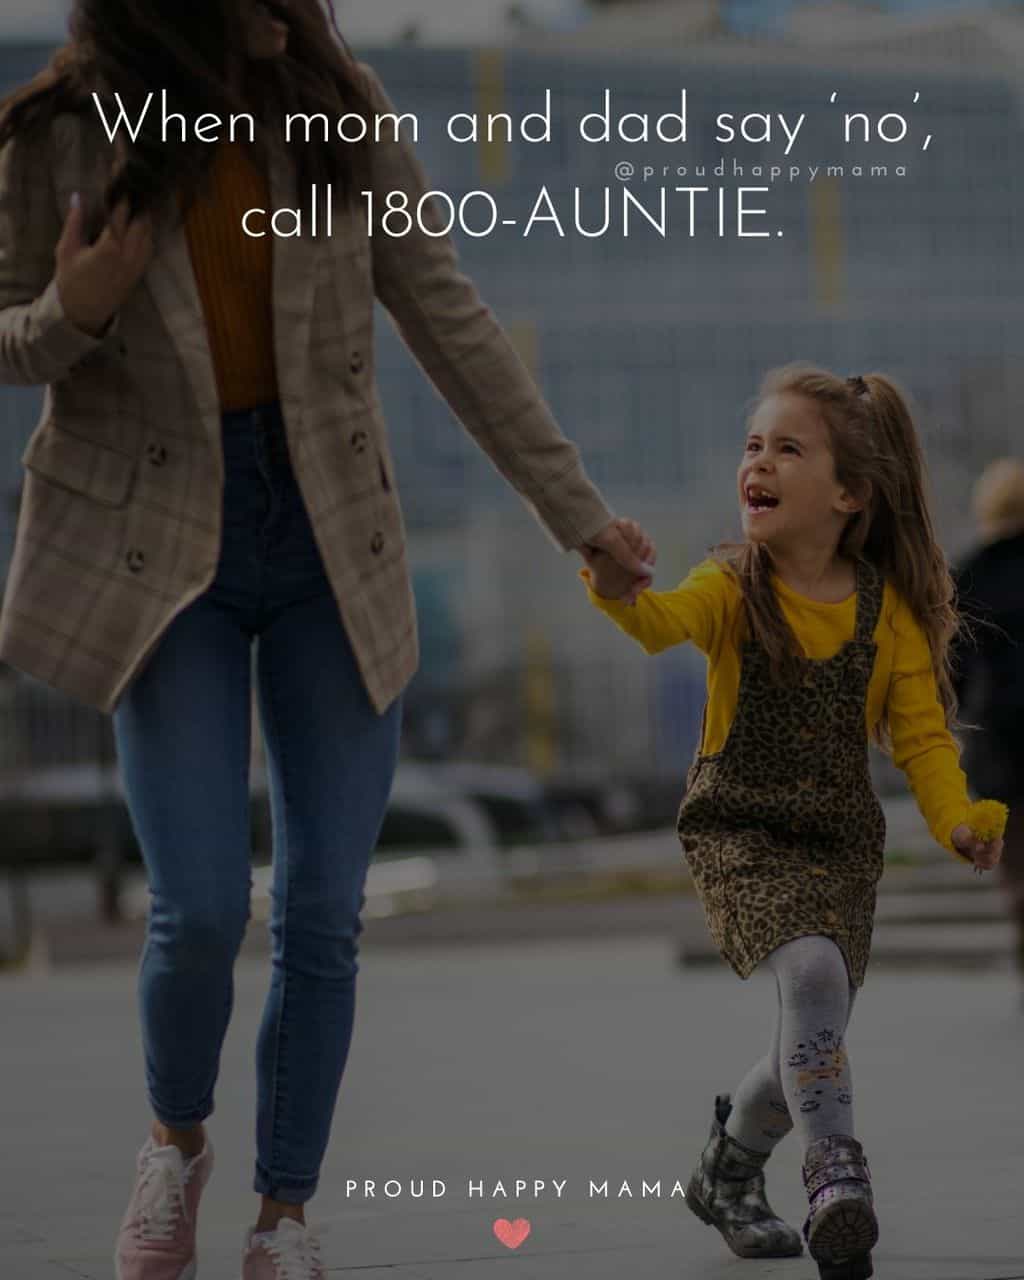 Niece Quotes - When mom and dad say no, call 1800-AUNTIE.